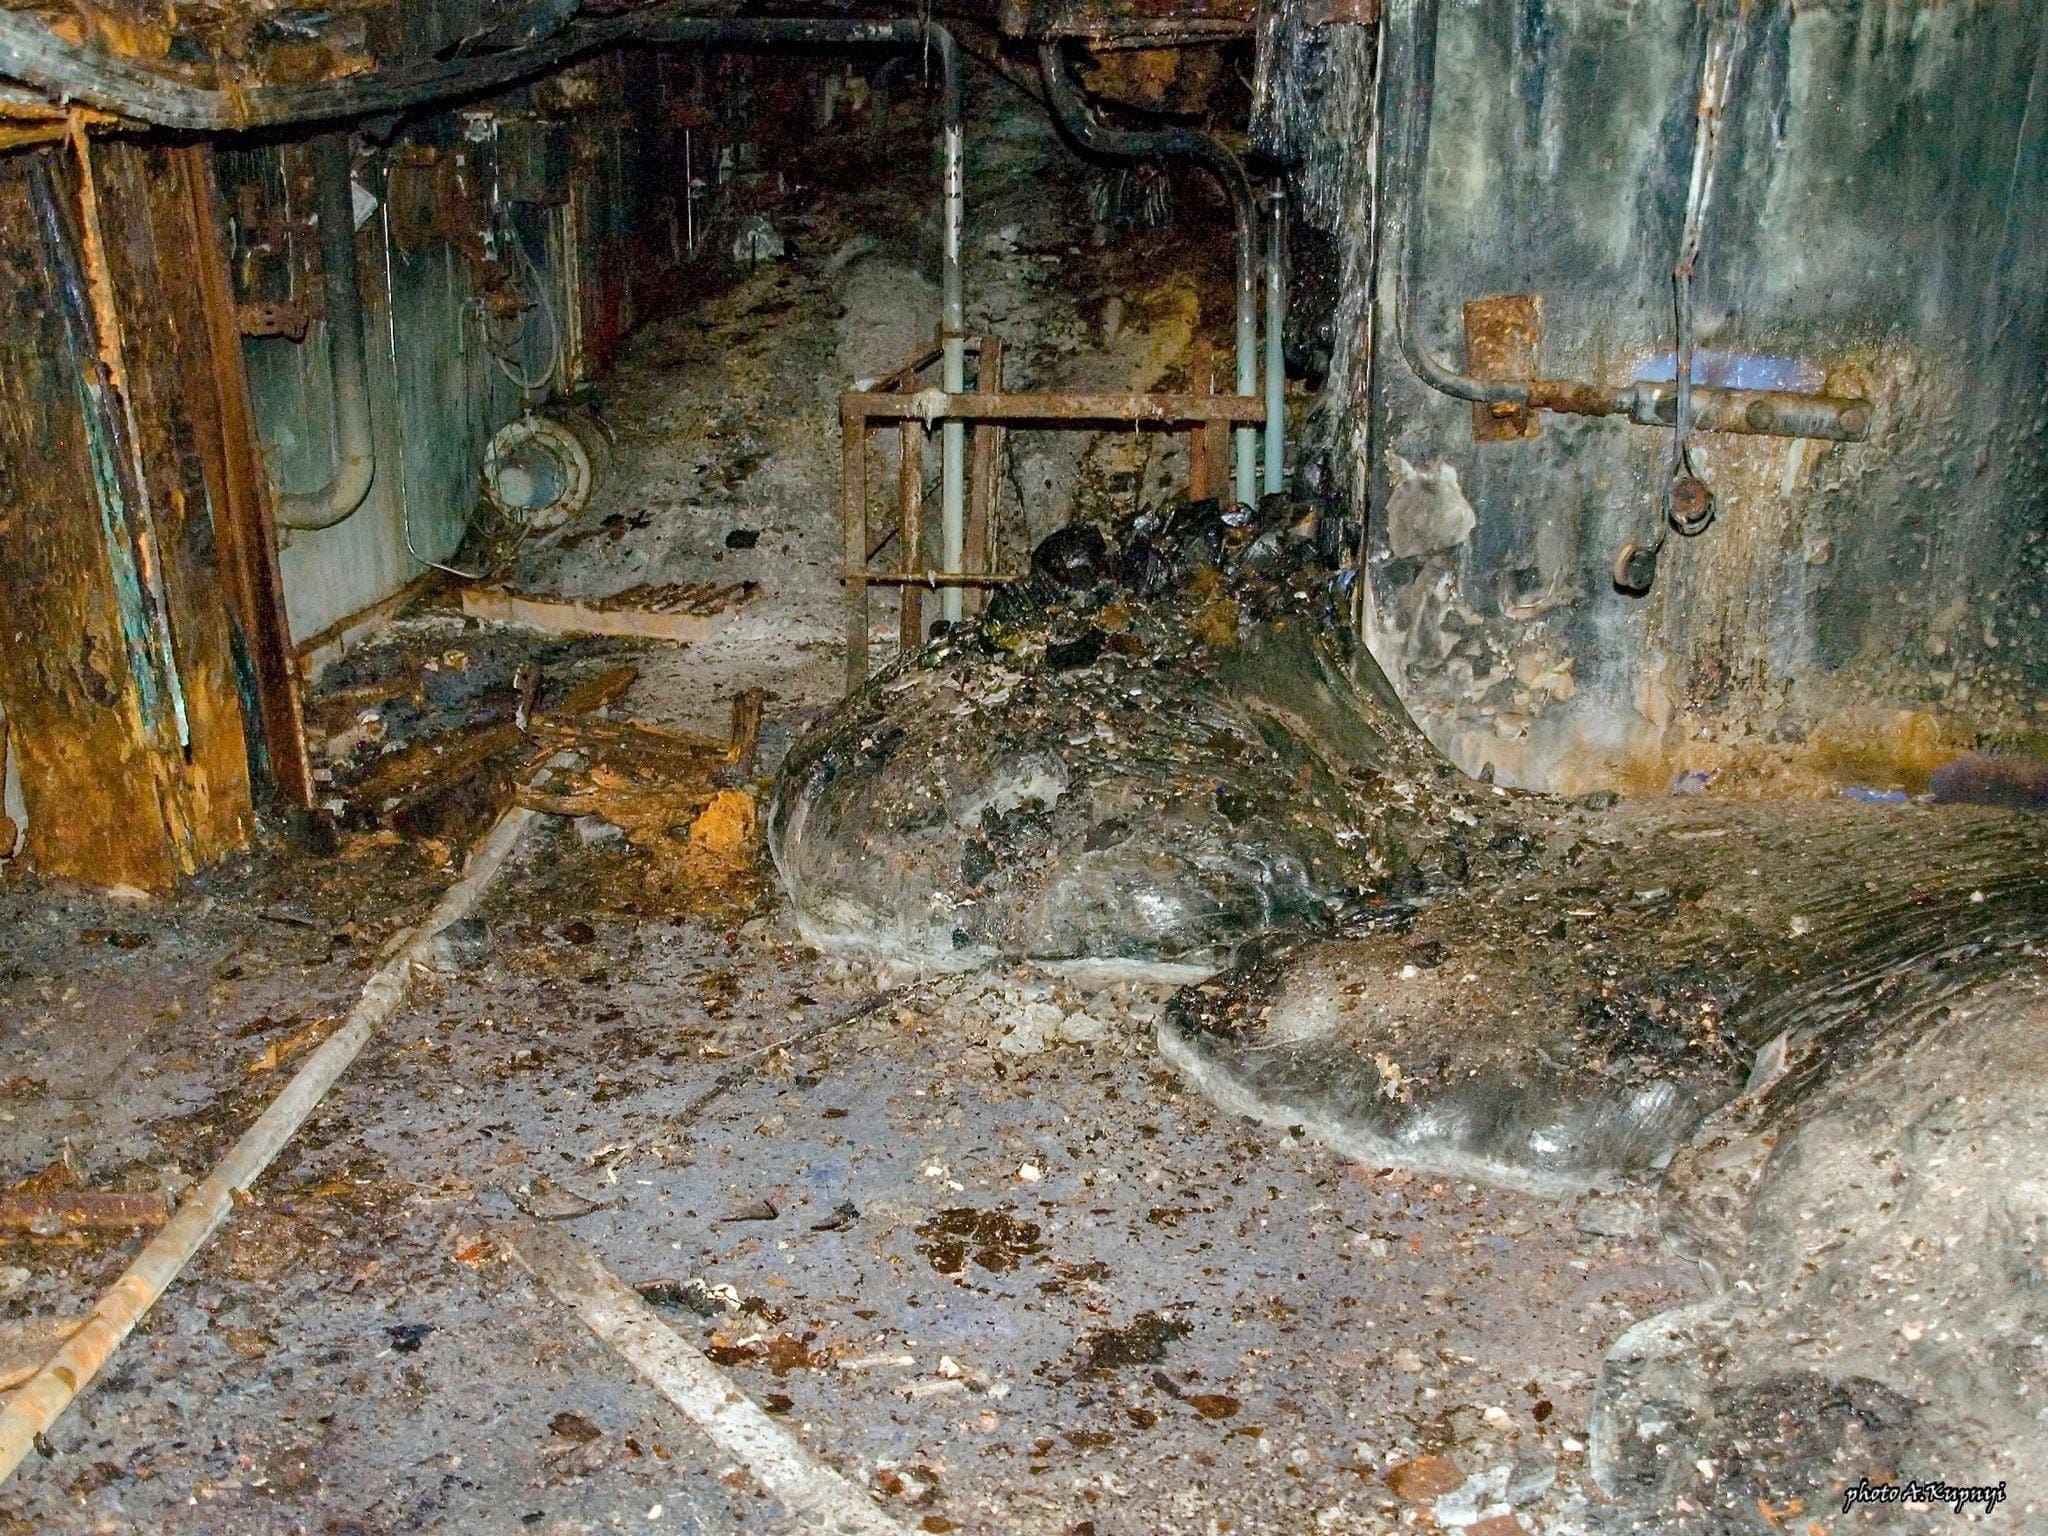 Elephant foot remains in Chernobyl